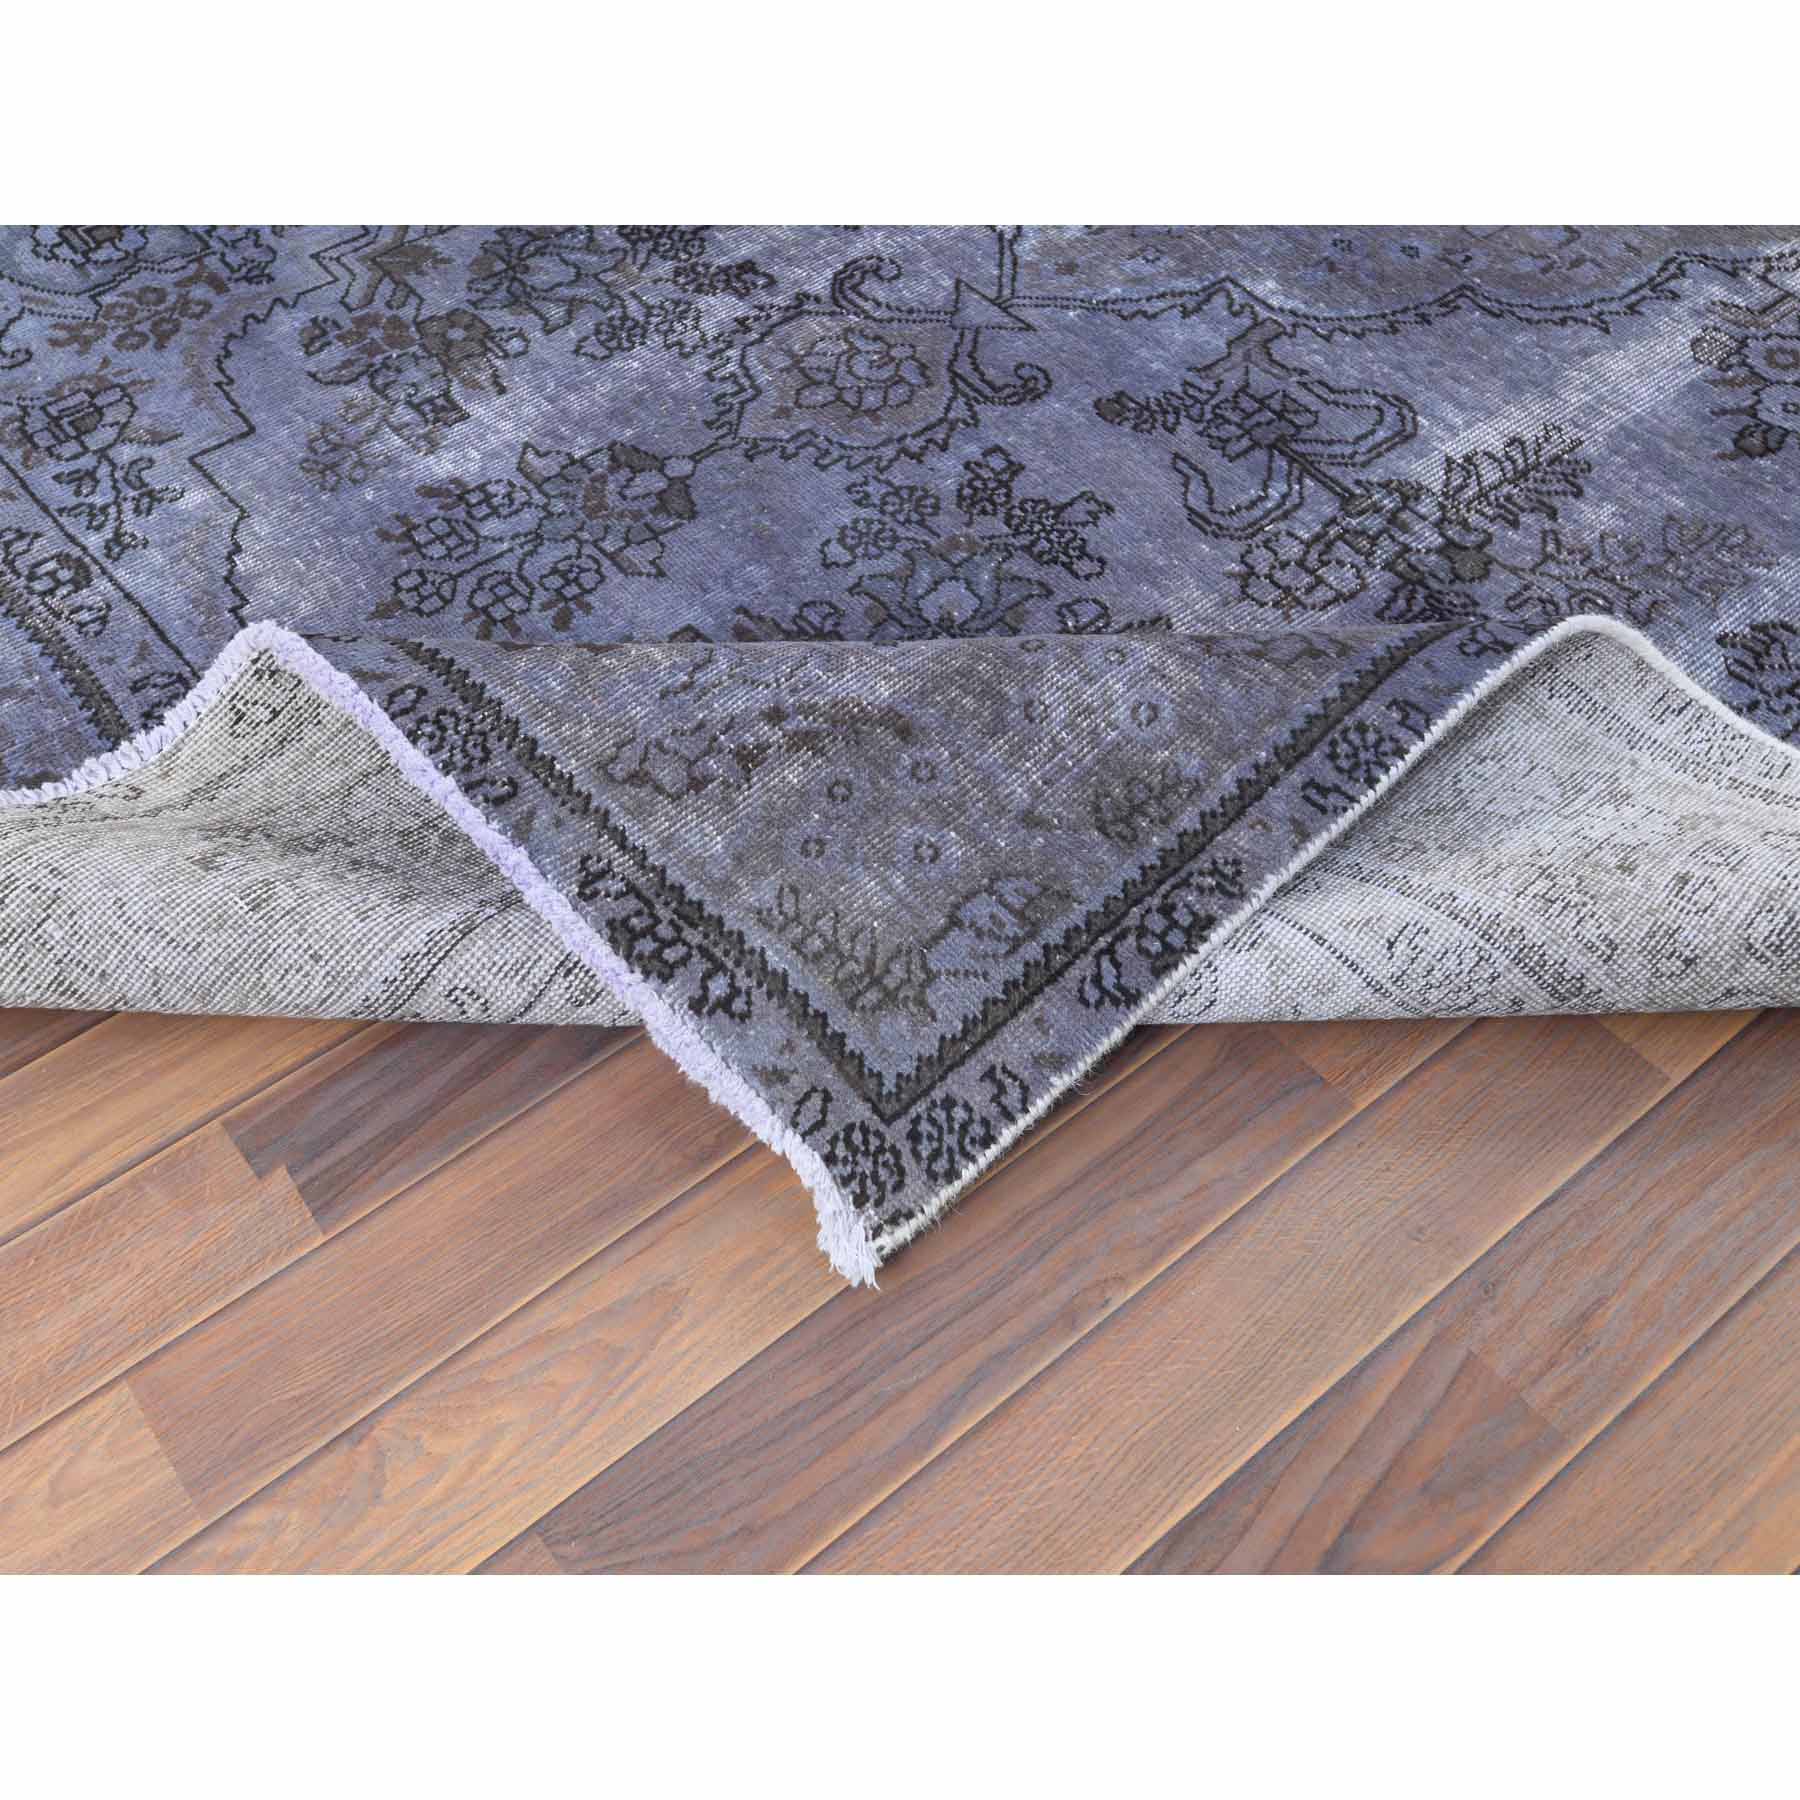 Overdyed-Vintage-Hand-Knotted-Rug-307990